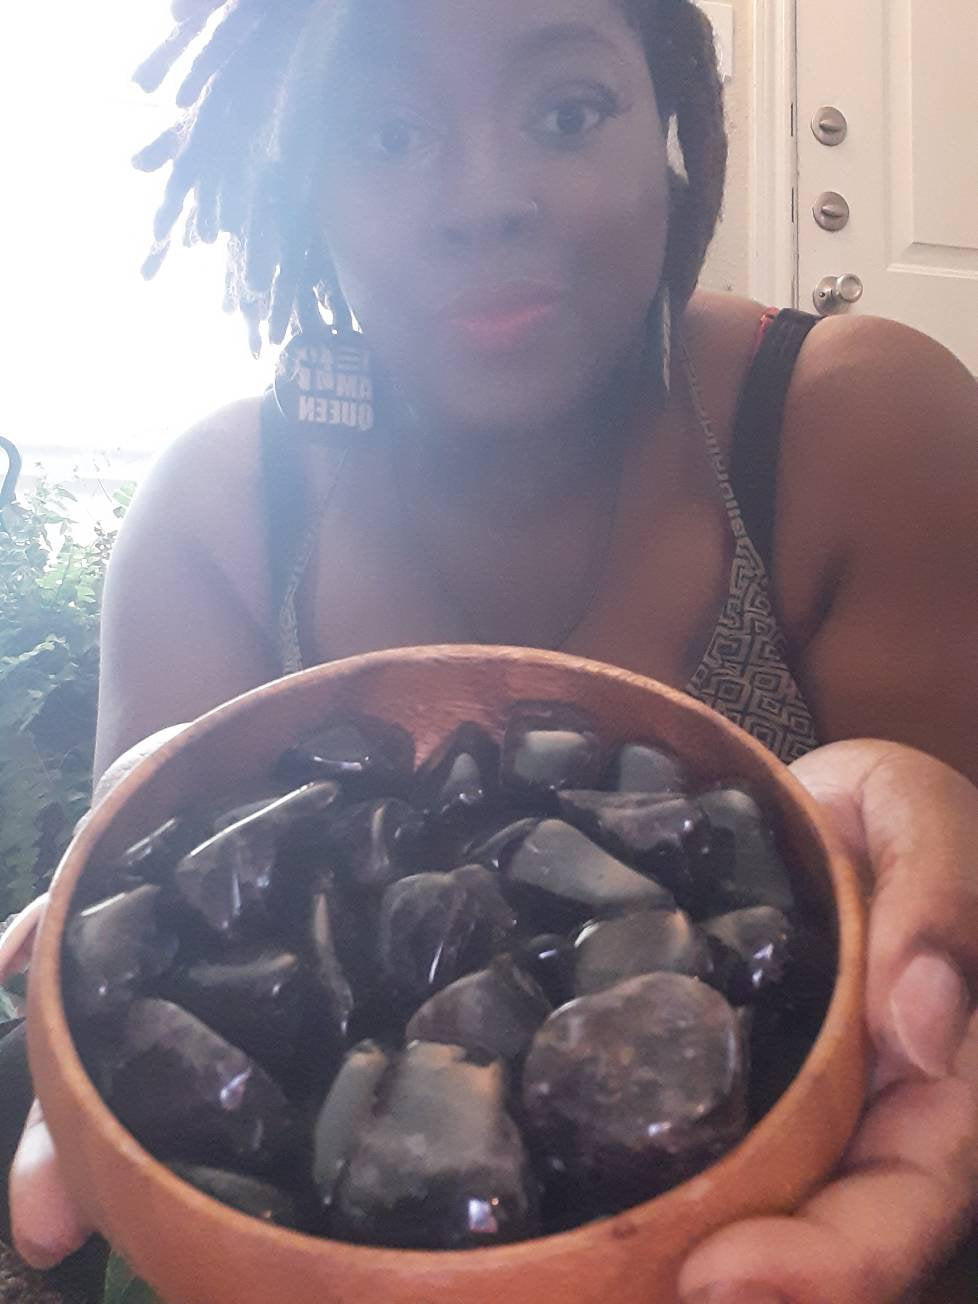 Tumbled Premium Smoky Quartz for transformation and clearing negative energy